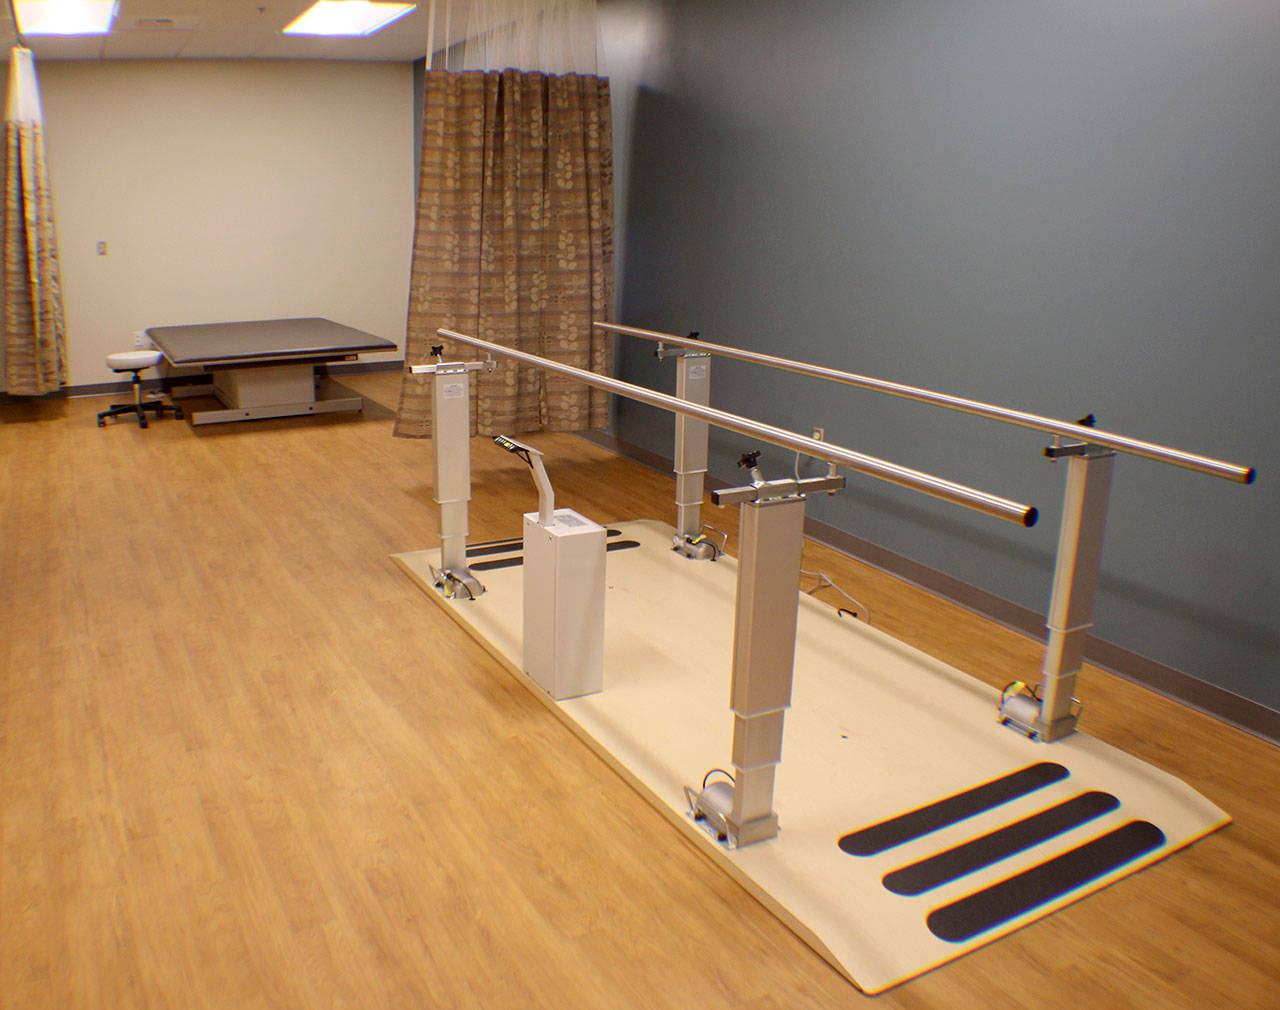 Therapy bars at Summit Pacific Wellness Center can extend telescopically several feet higher to help patients. Photo taken during a celebration of the building’s completion on Jan. 25, 2019, in Elma, Washington. Michael Lang | Grays Harbor News Group